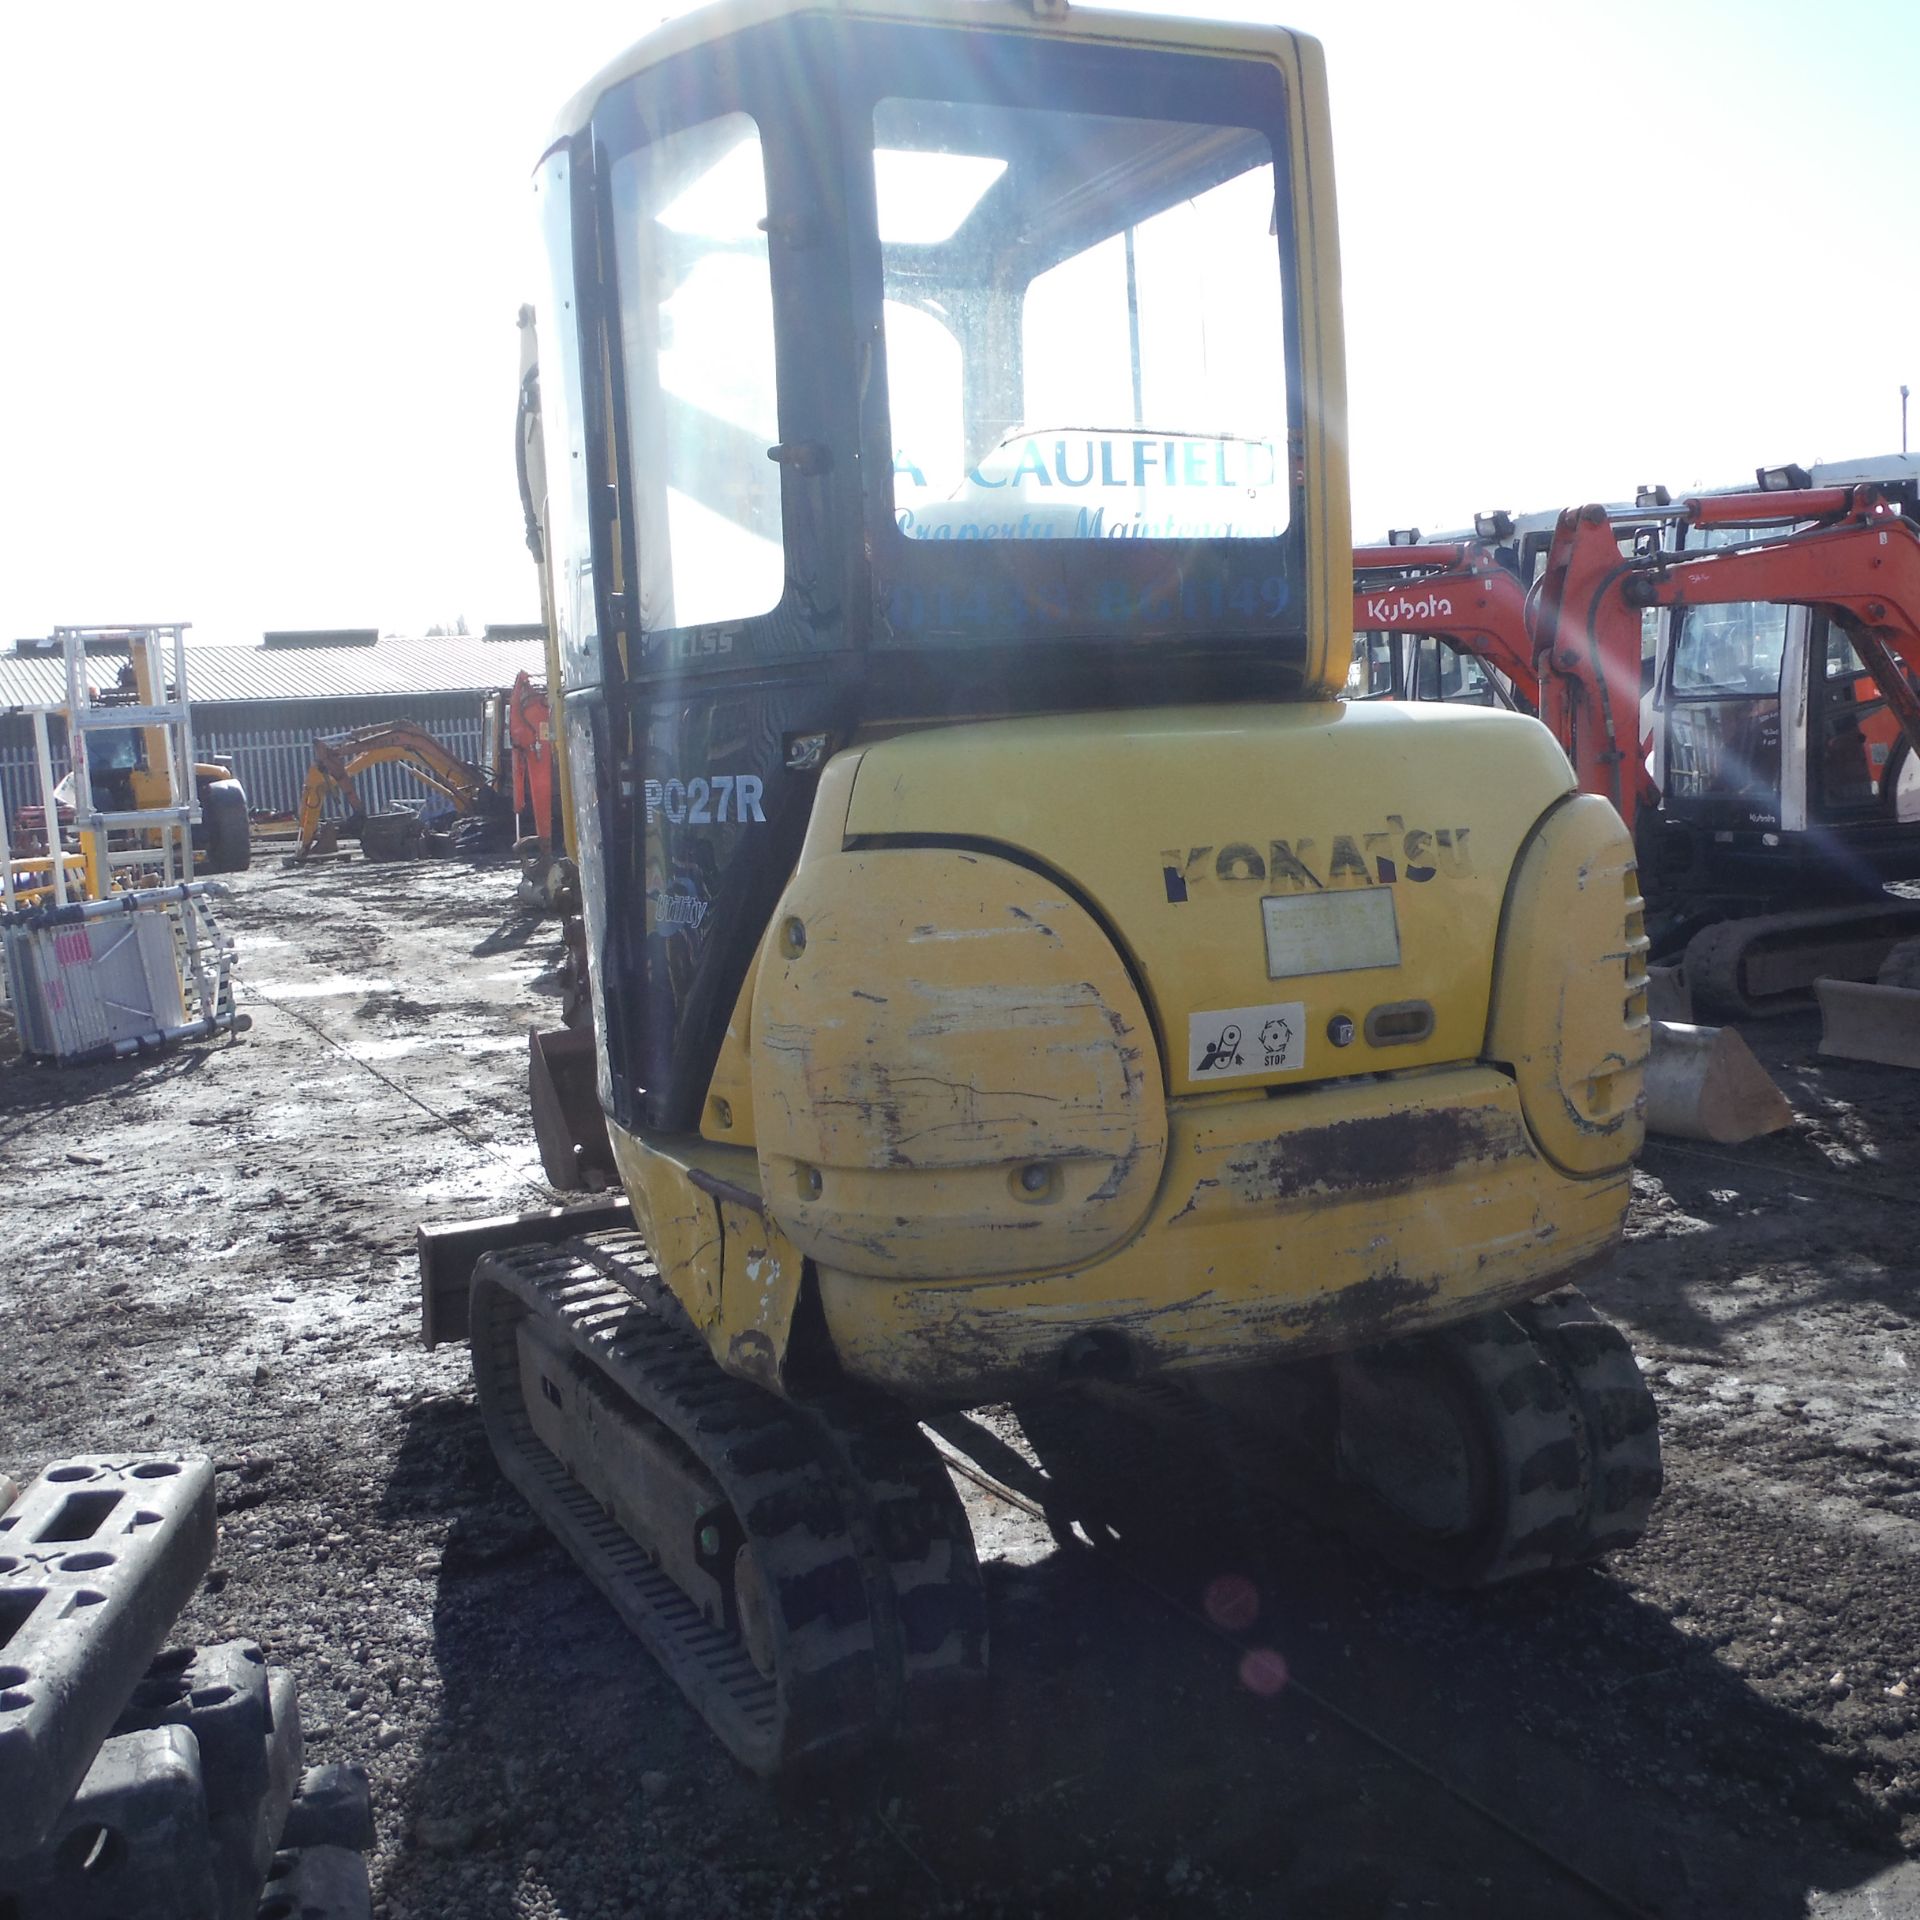 2001 KOMATSU PC27R-8 rubber tracked excavator c/w bucket, blade & piped (s/n F30972) (3572 rec - Image 4 of 4